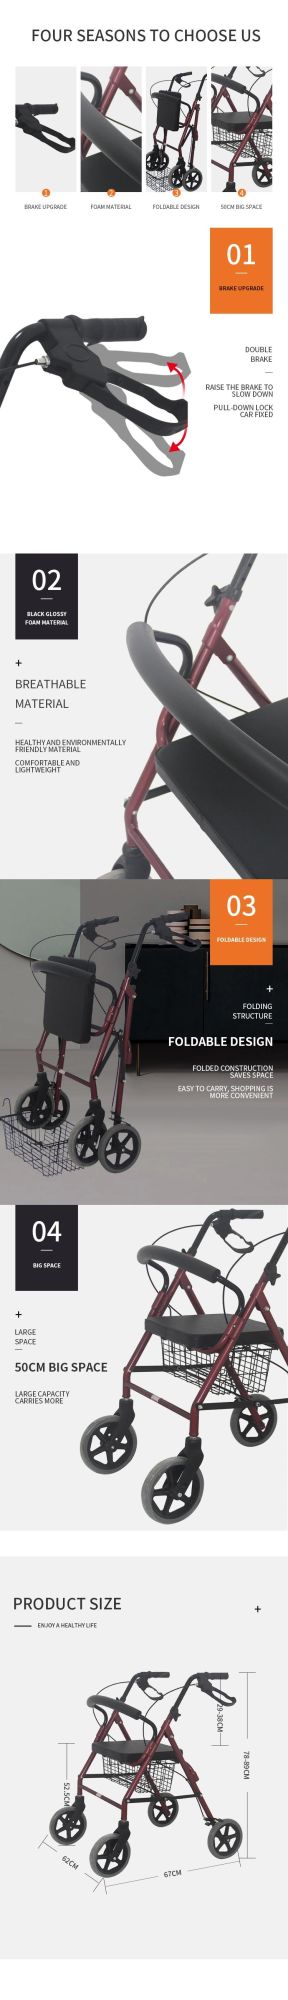 Folding Rehabilitation Therapy 2 in 1 Walker Rollator with Seat for The Elderly